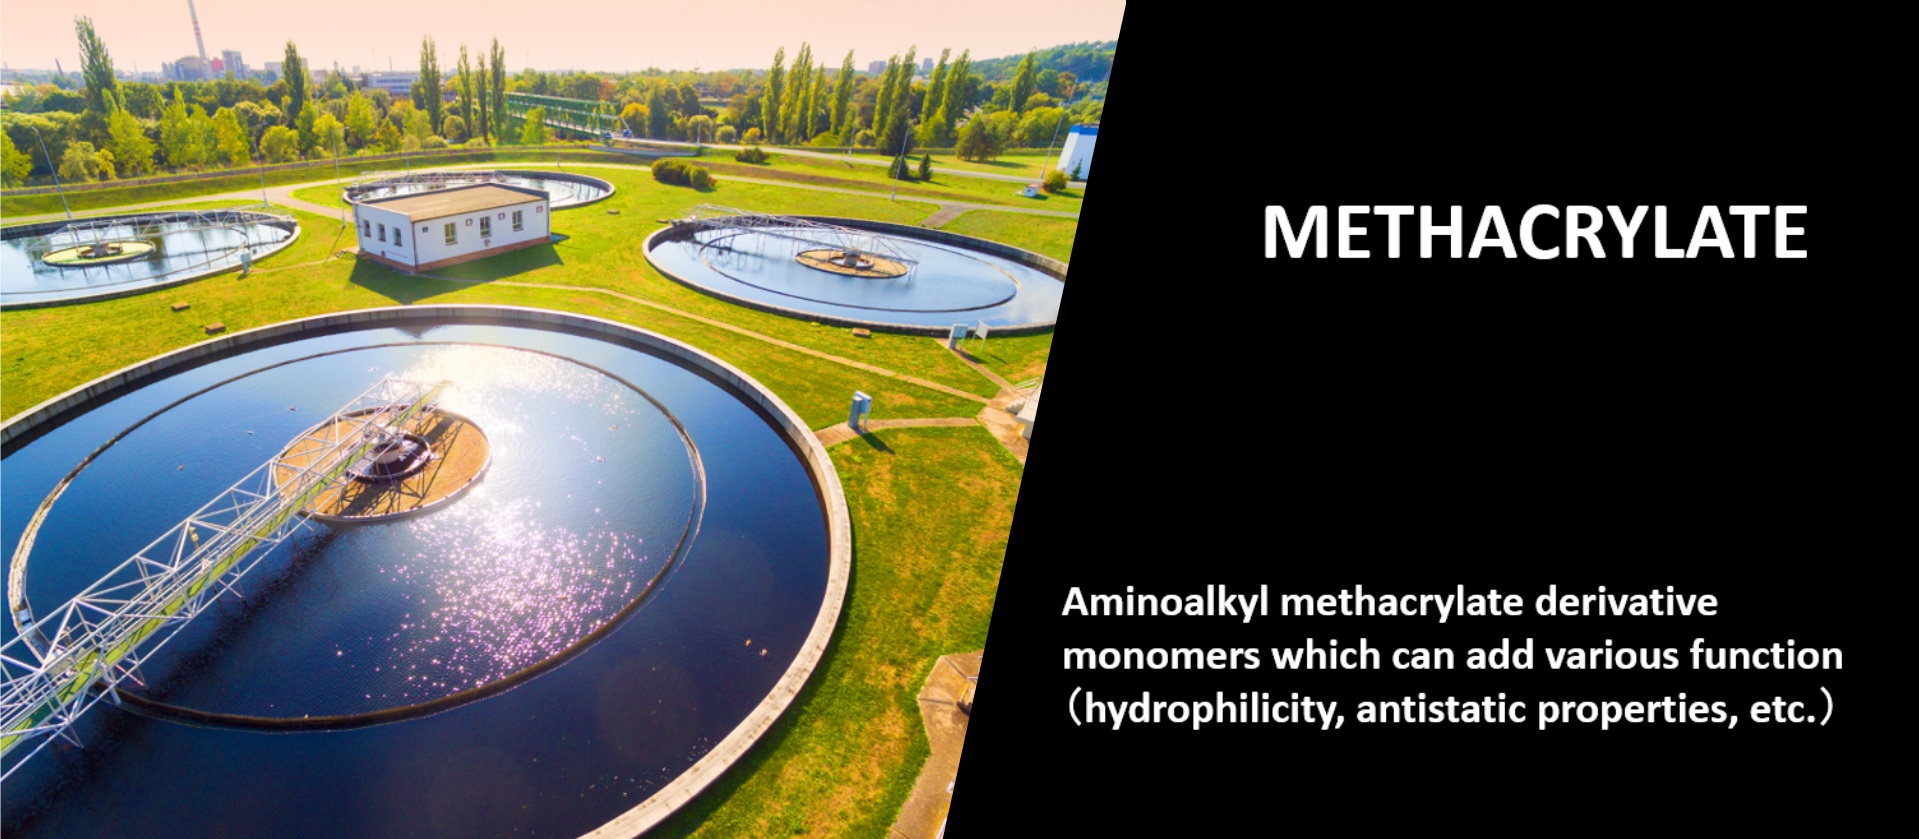 Aminoalkyl methacrylate derivative monomer "METHACRYLATE" Products page is now open